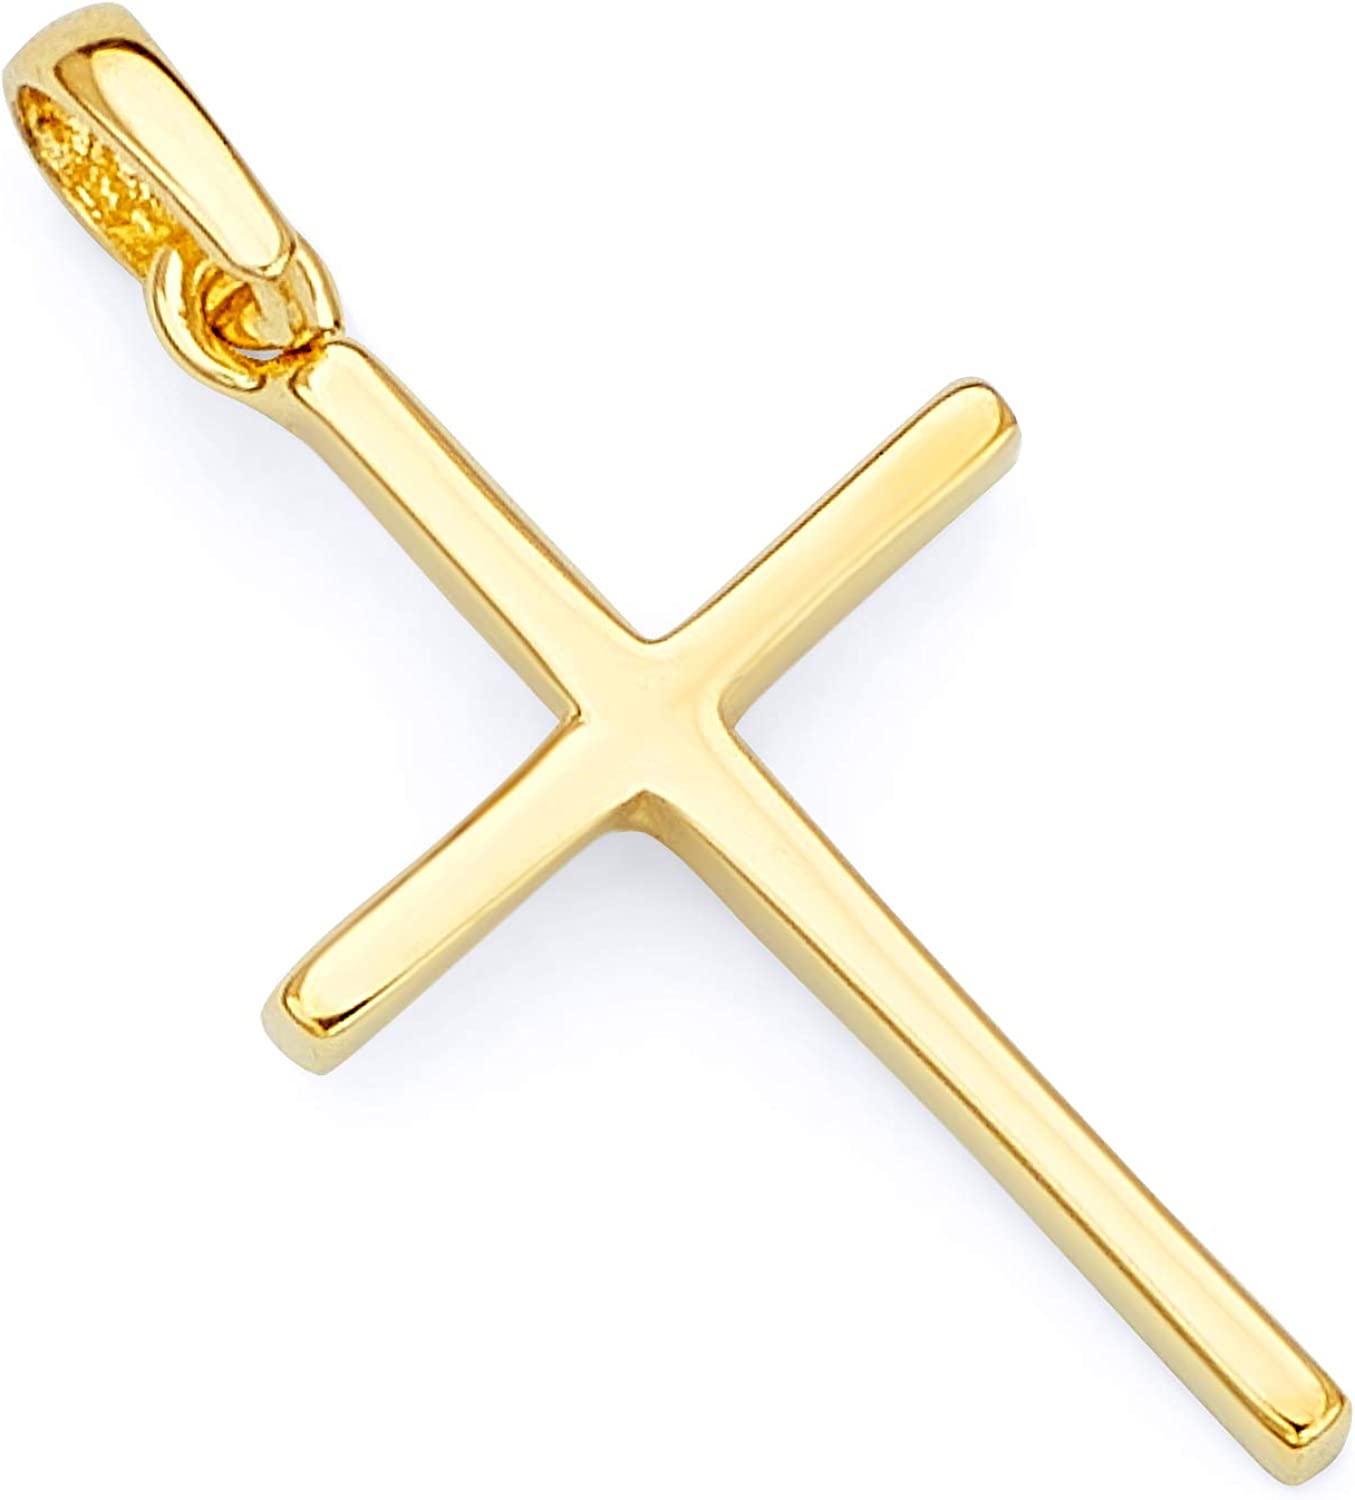 14k Yellow Gold Cross Religious Charm Pendant - 2 Different Size Available